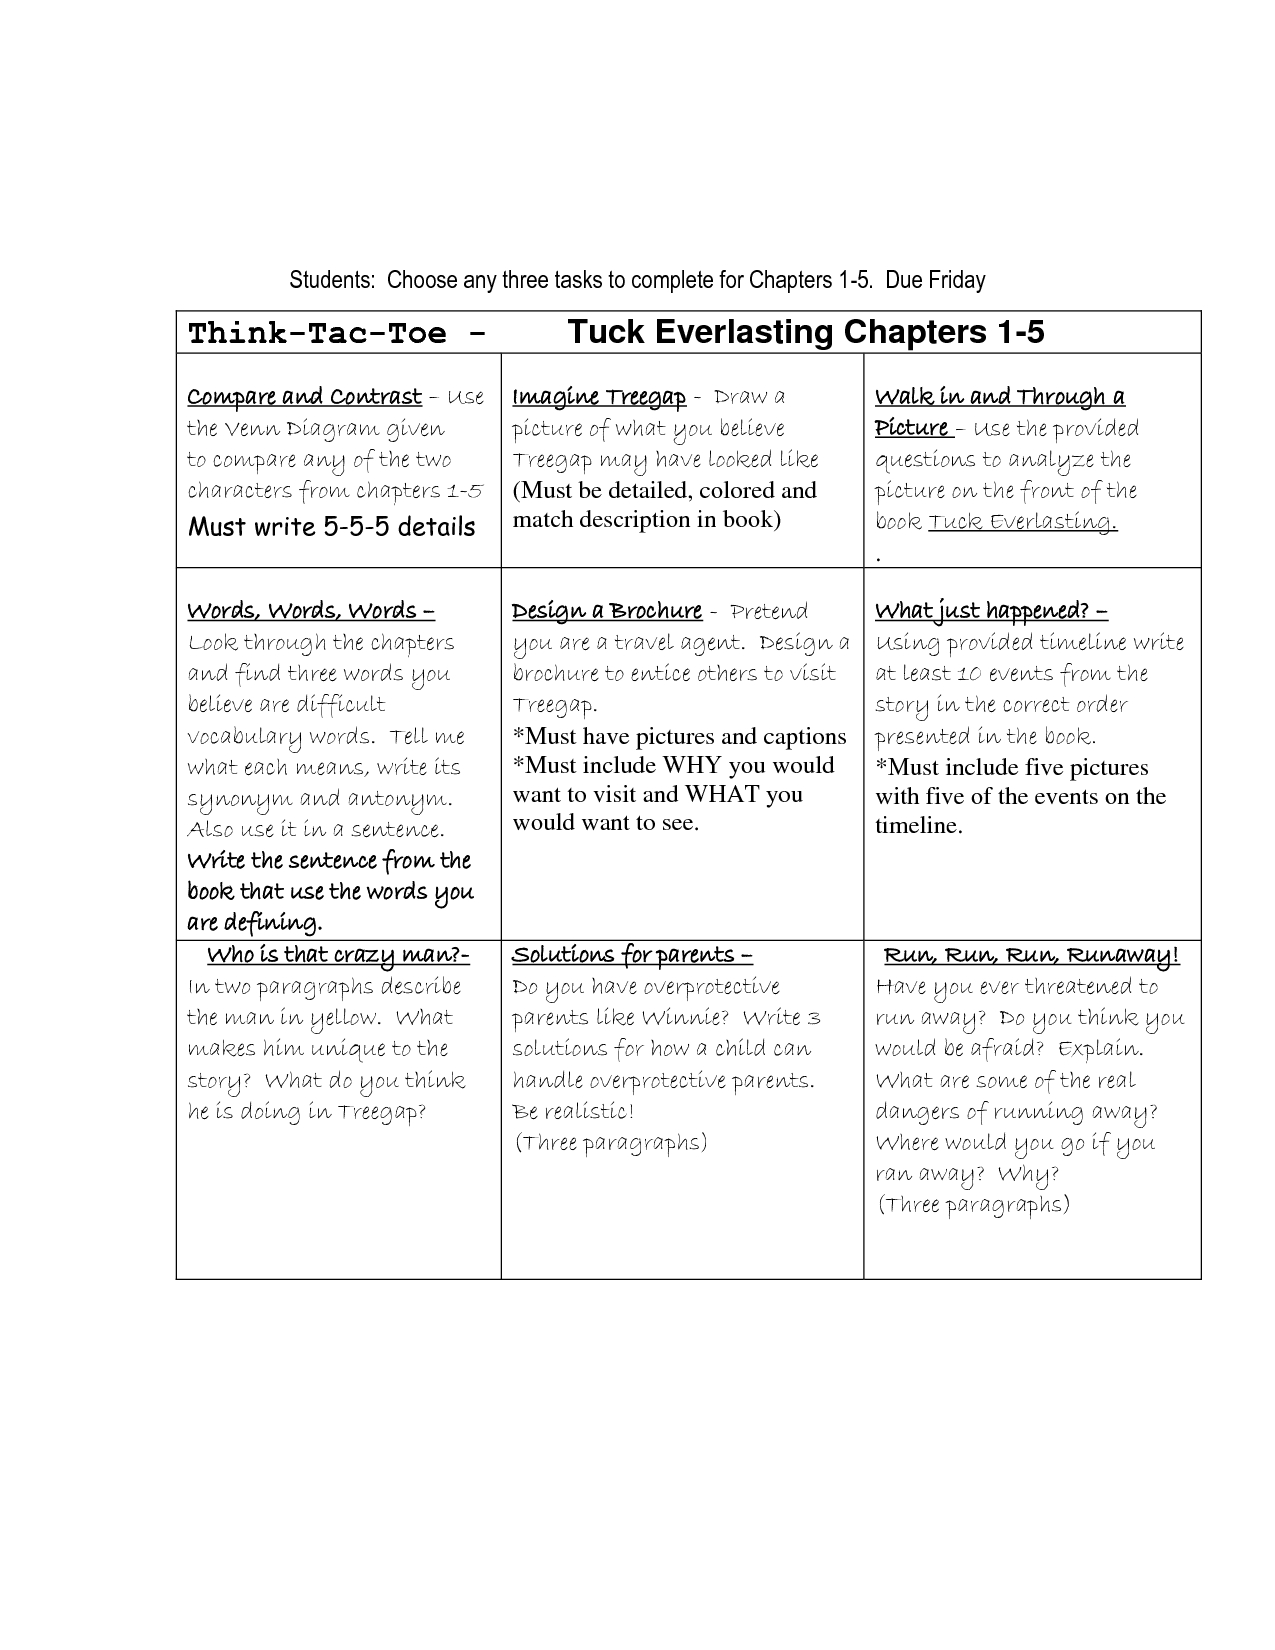 Think_Tac_Toe Tuck Everlasting Chapters 1-5 | Middle School